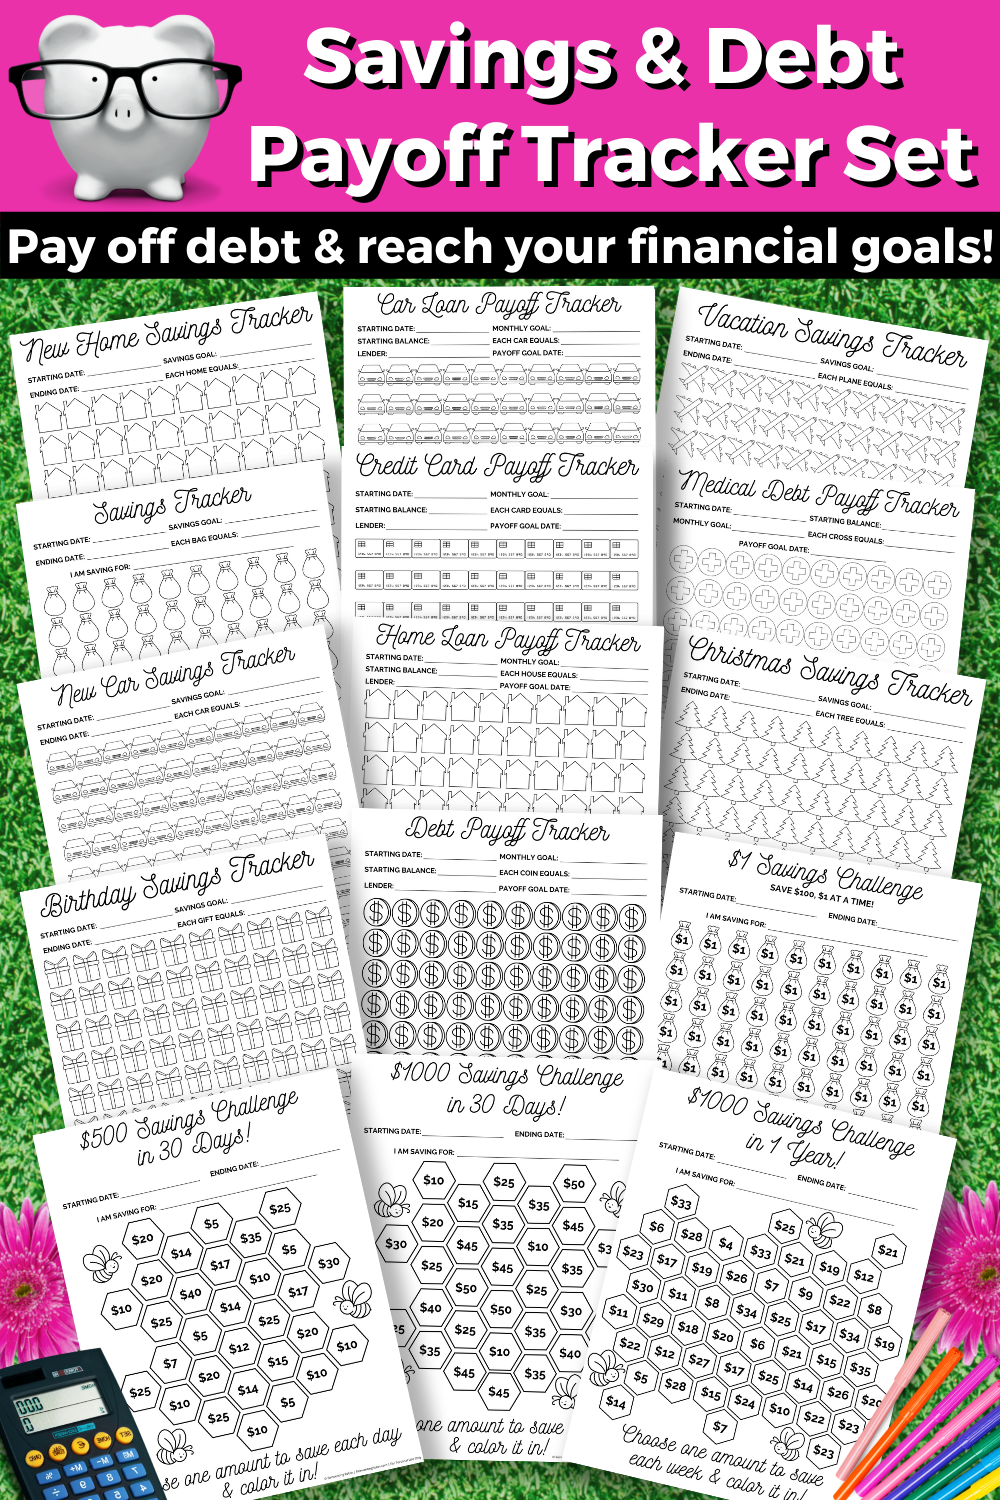 Minimalist Savings & Debt Payoff Tracker Set (15 Pages) - For Instant Download